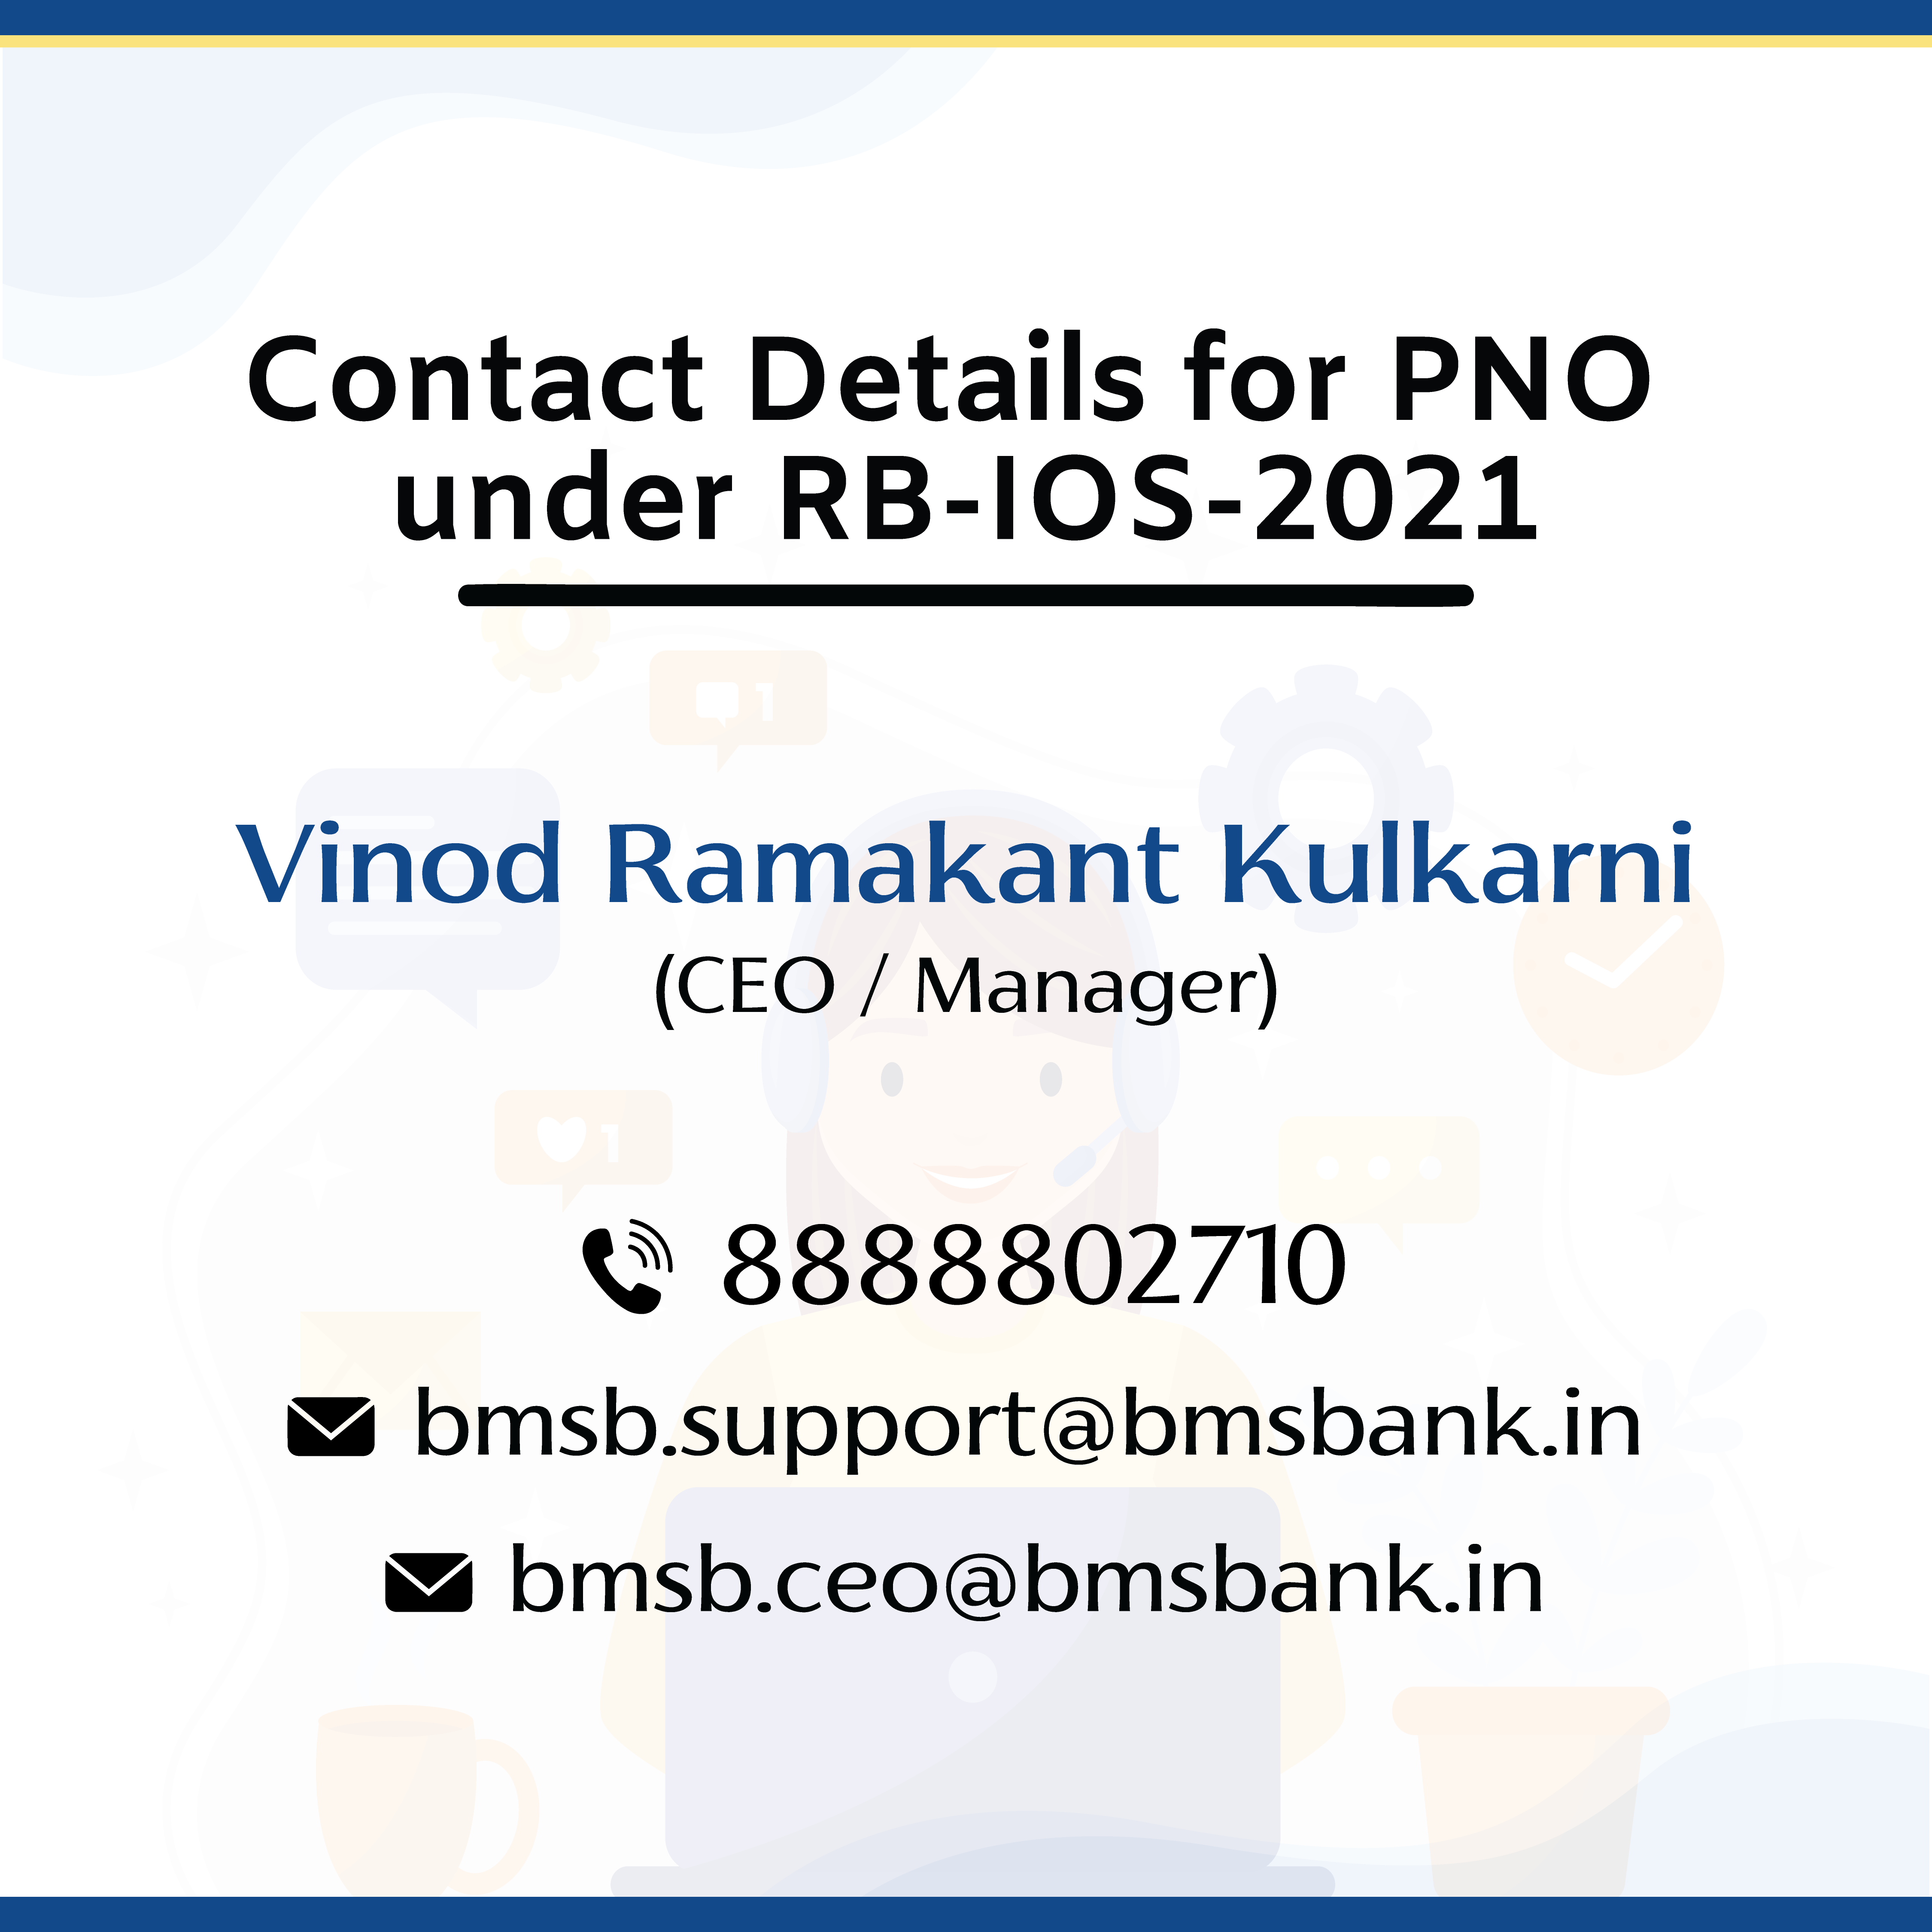 Contact Details of PNO